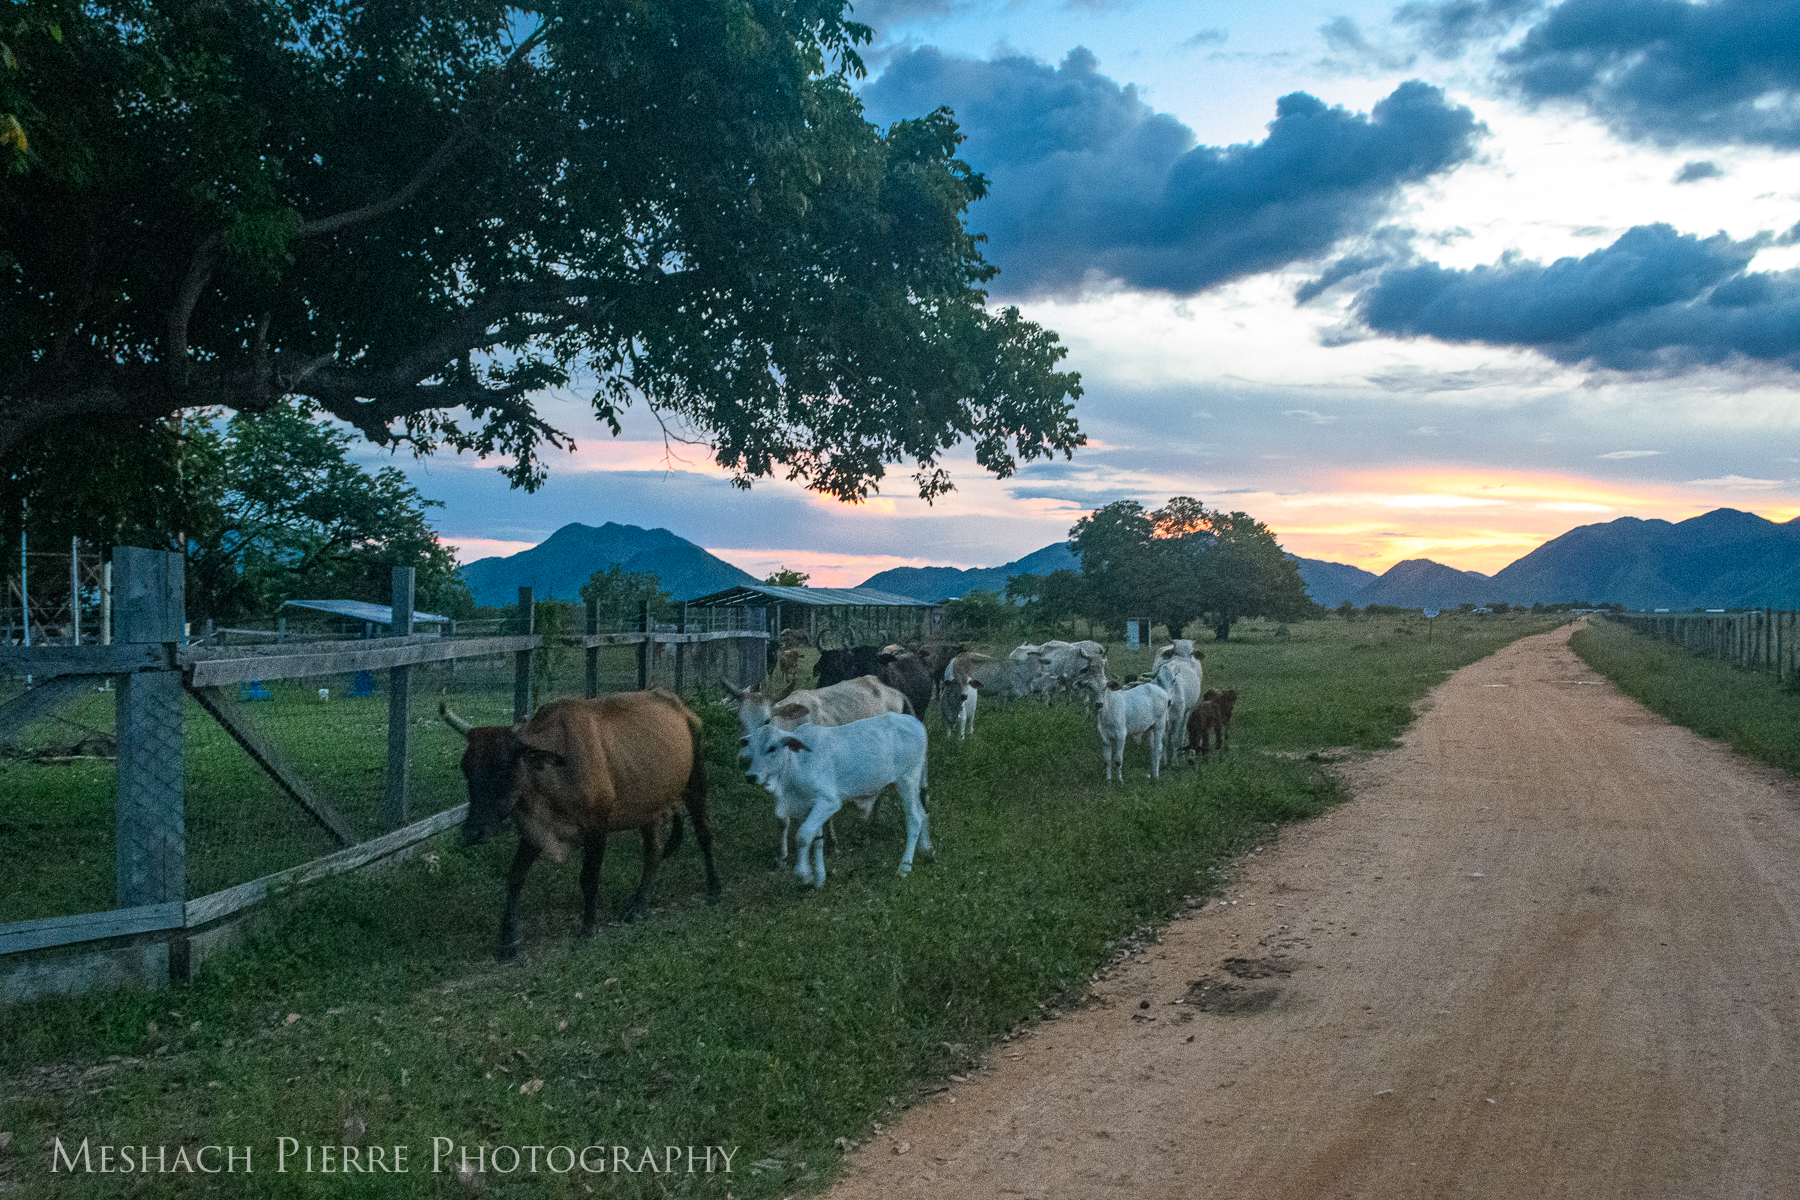 Cows walking into a village at dusk